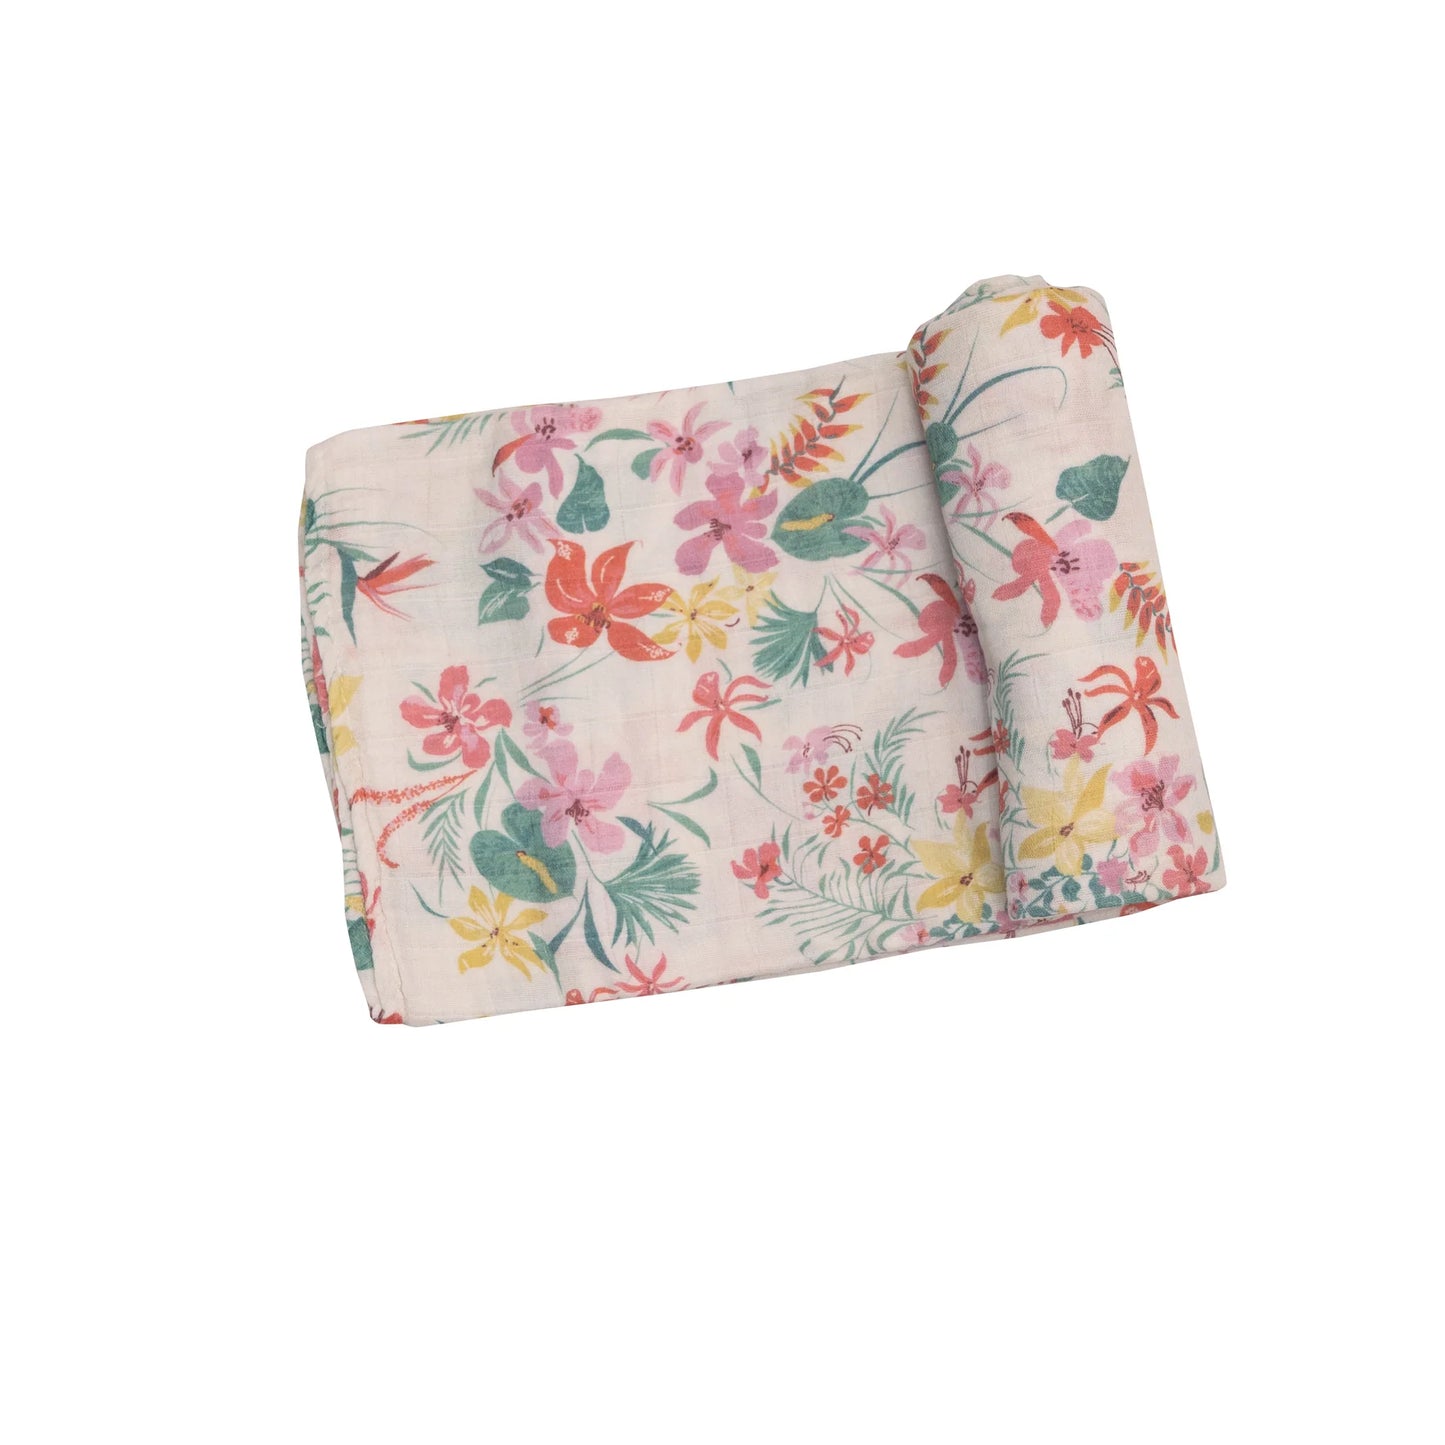 Leilani Floral Swaddle